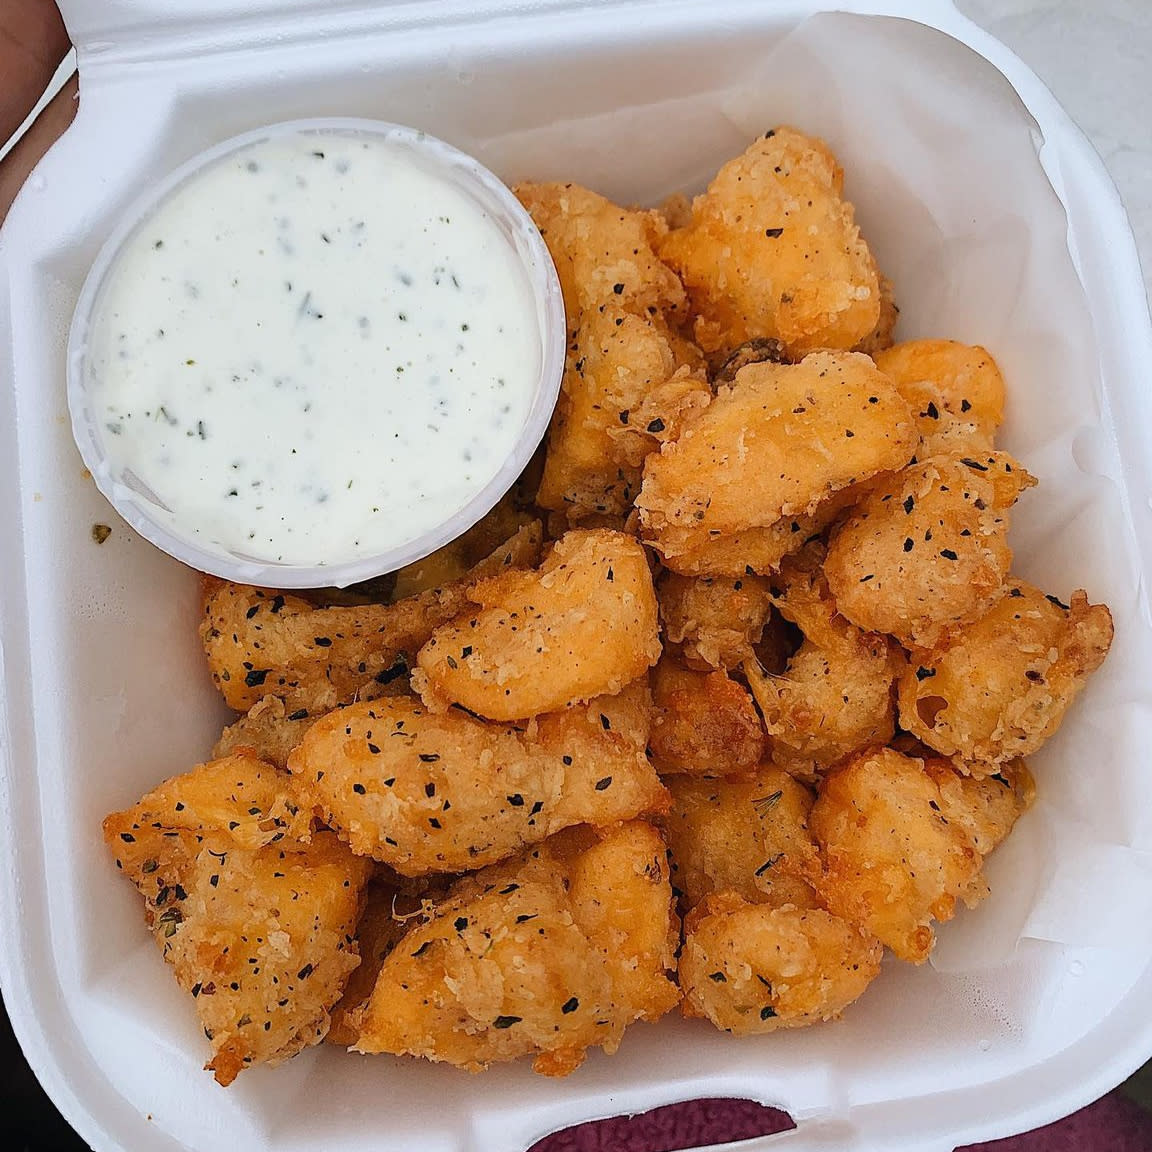 Check out Stevens Point local cheese curds spots.